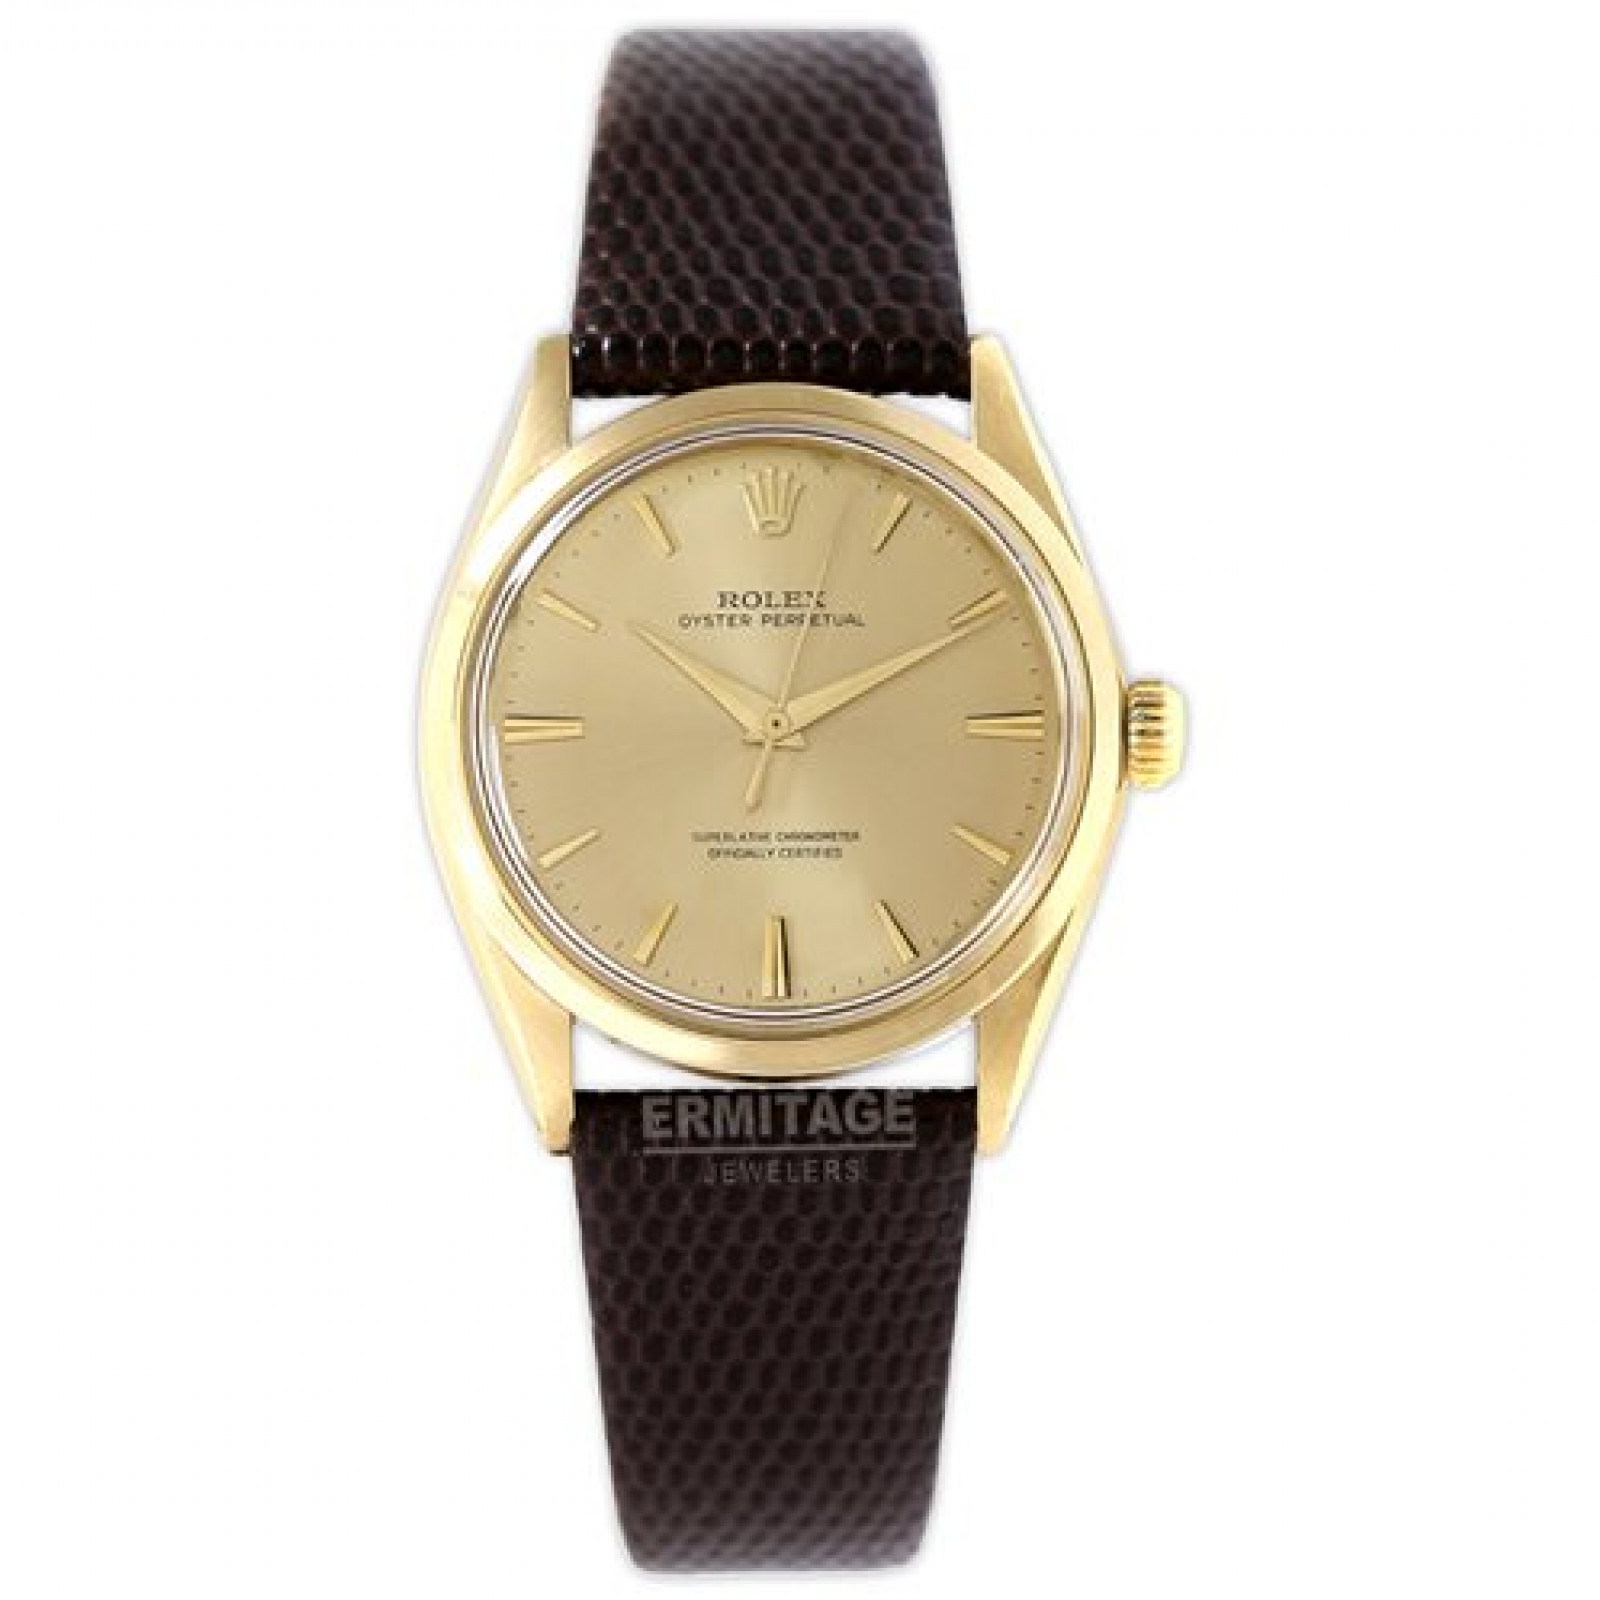 Vintage Rolex Oyster Perpetual 1002 Gold